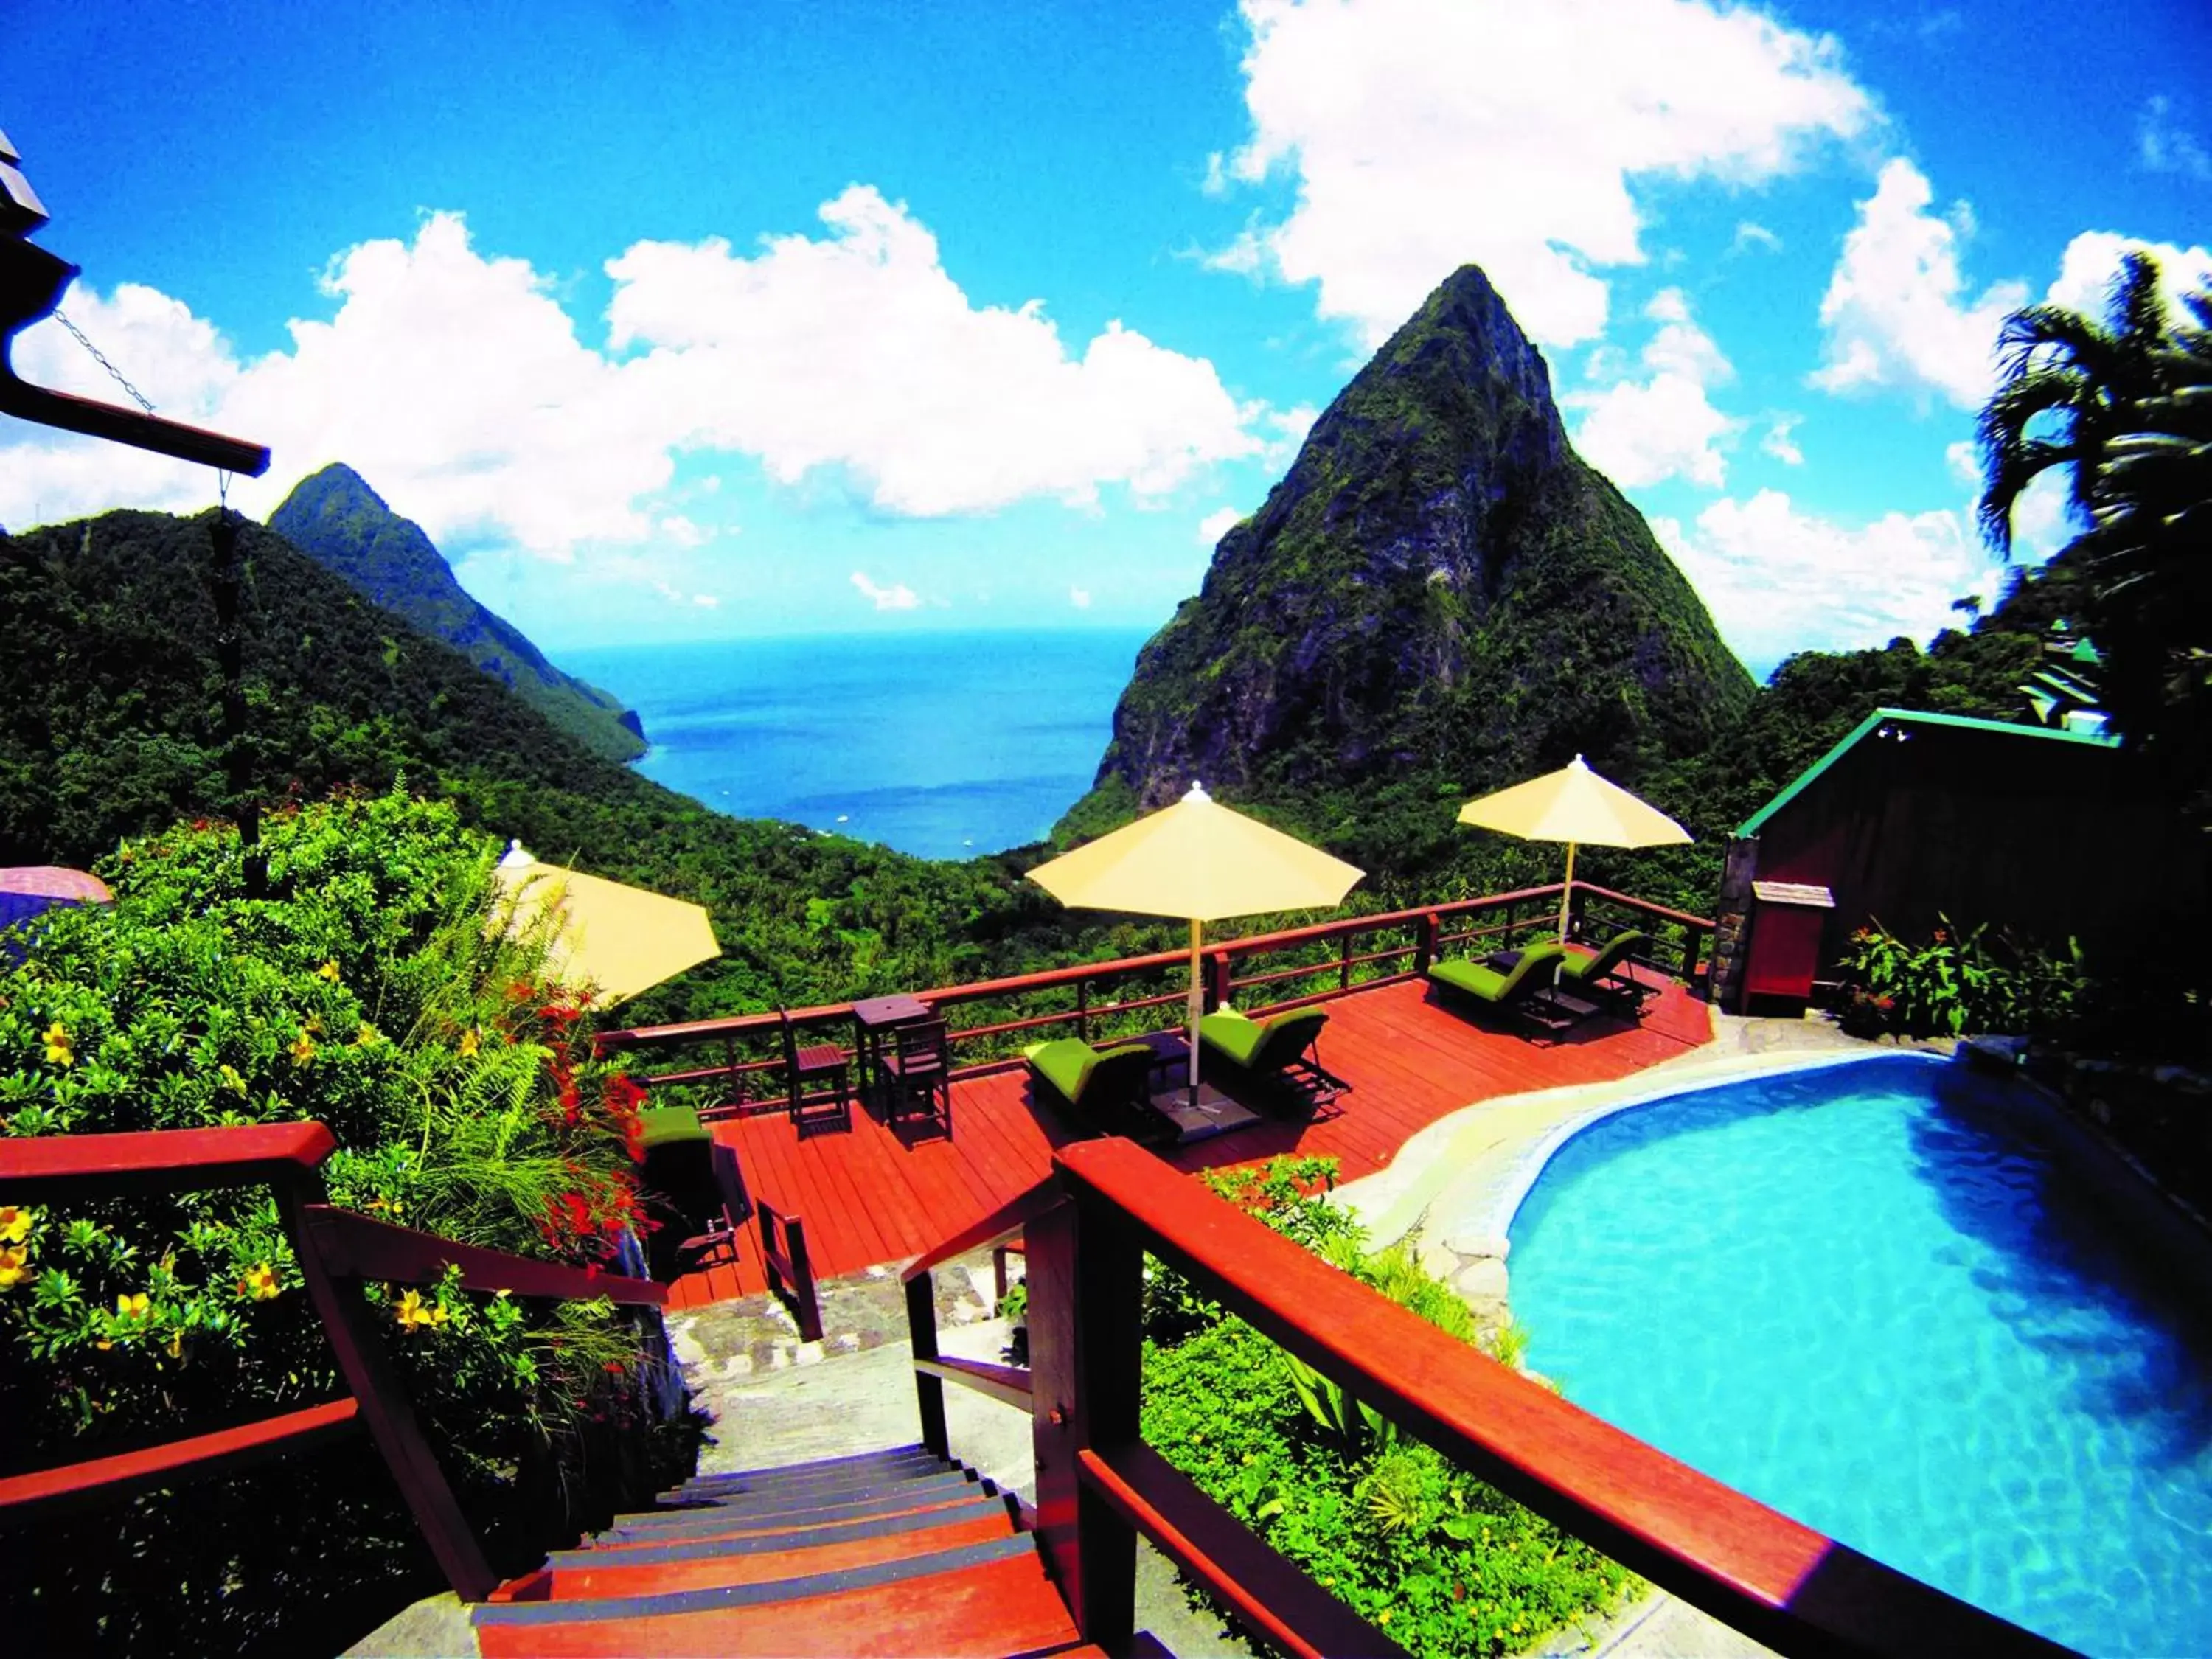 Mountain view, Pool View in Ladera Resort